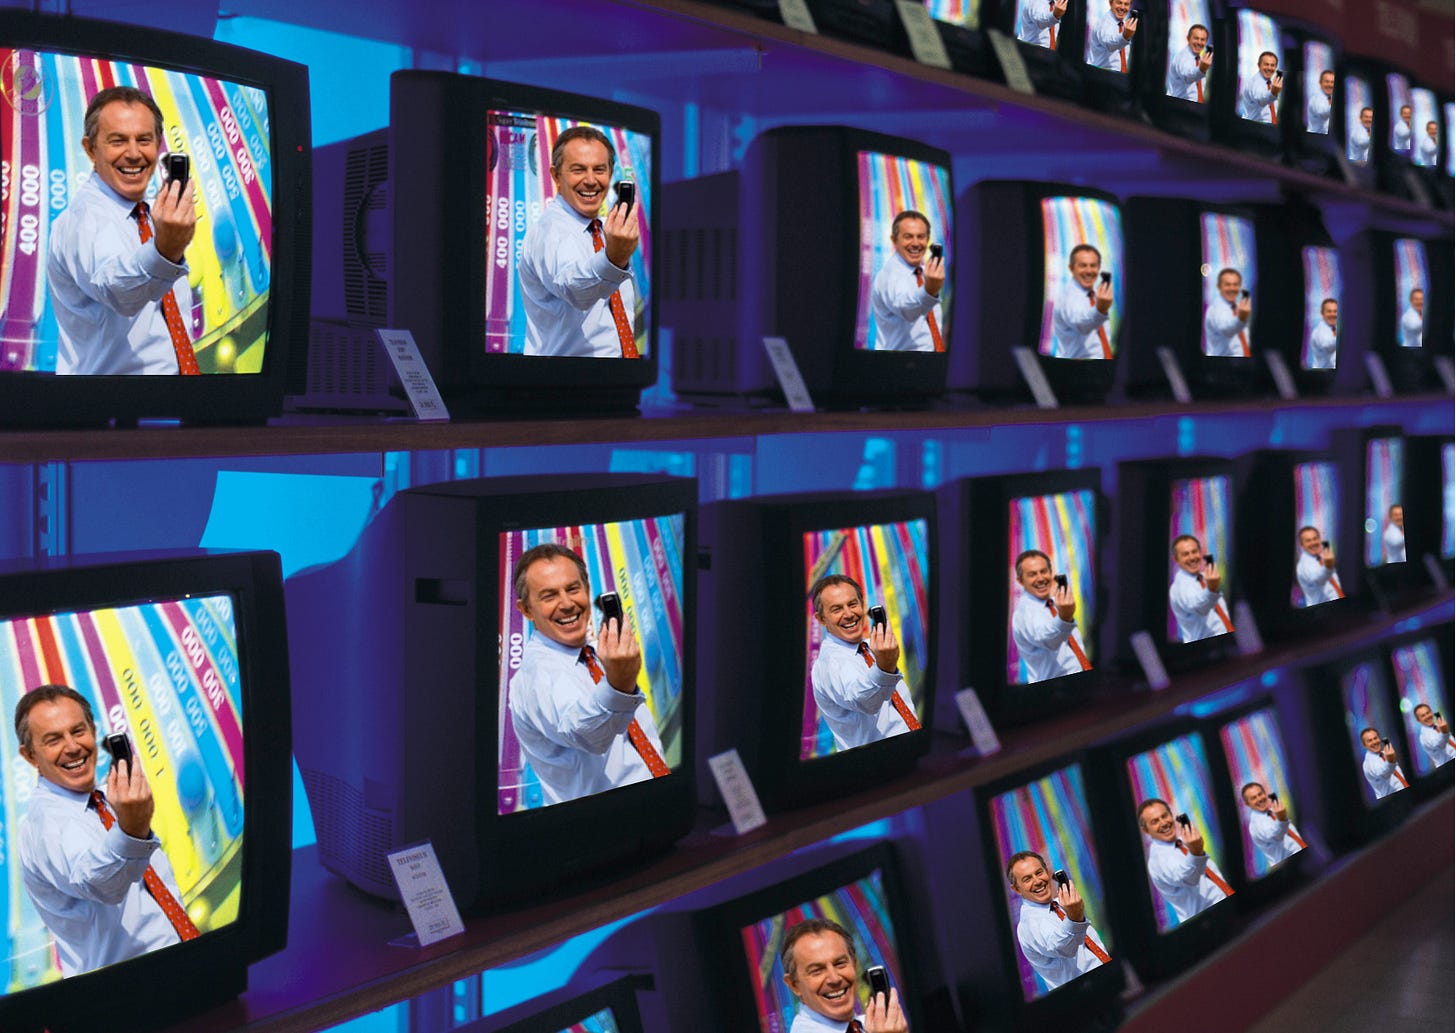 A wall of TVs, all with Tony Blair on them